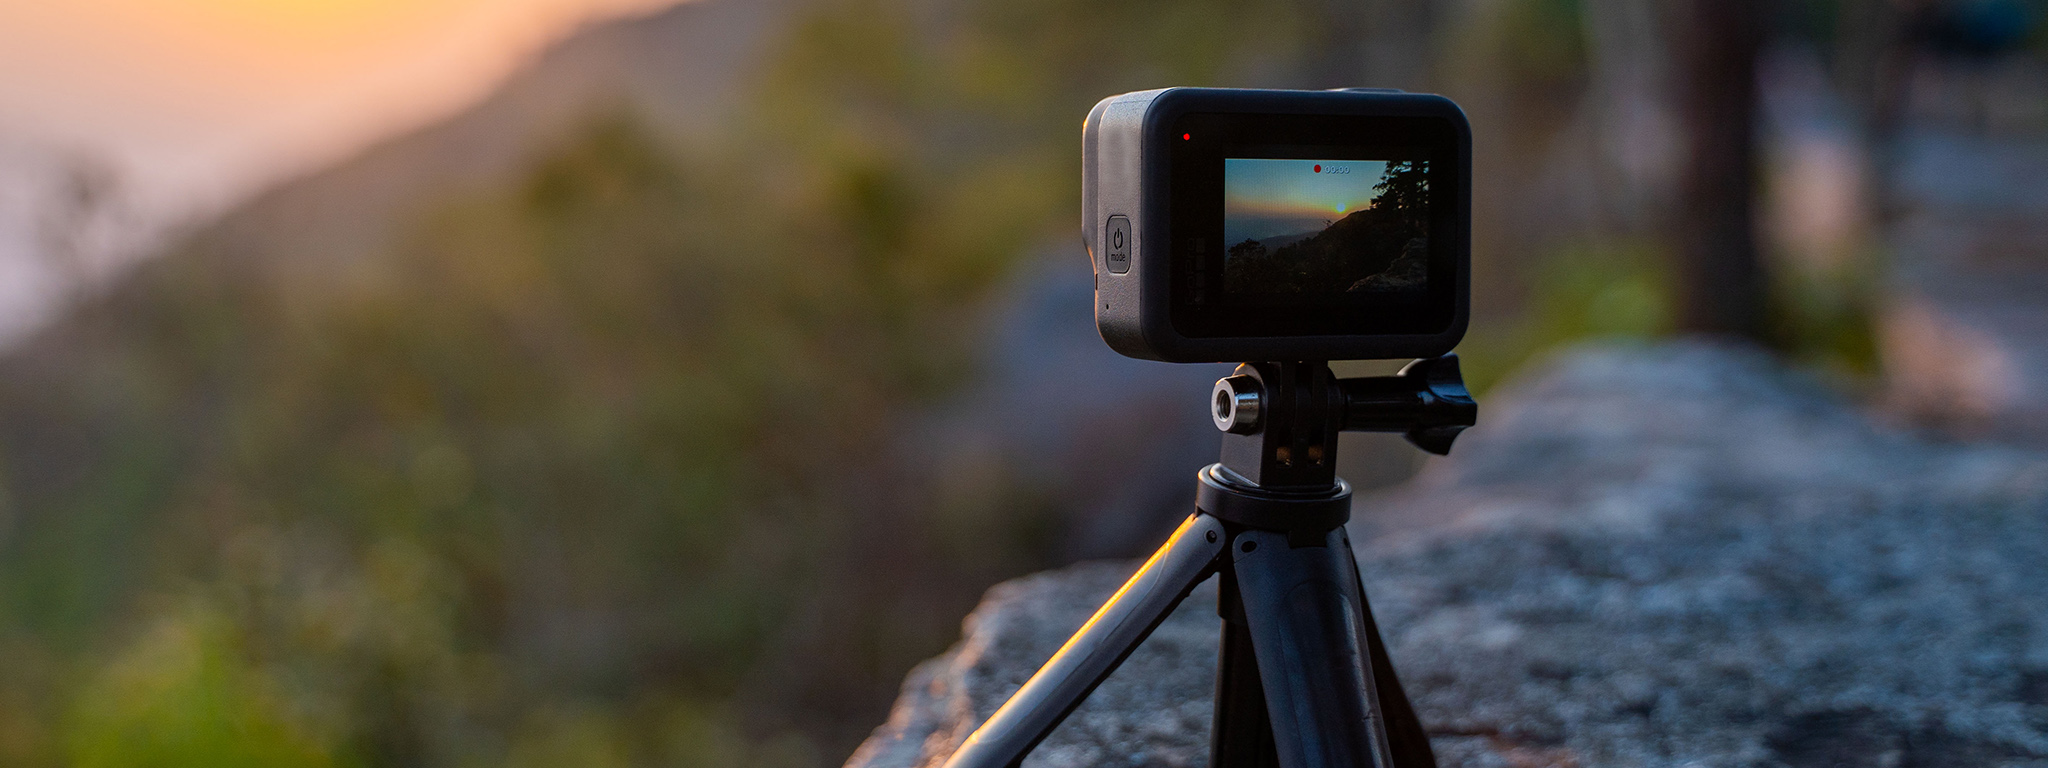 A GoPro shooting a sunset time-lapse